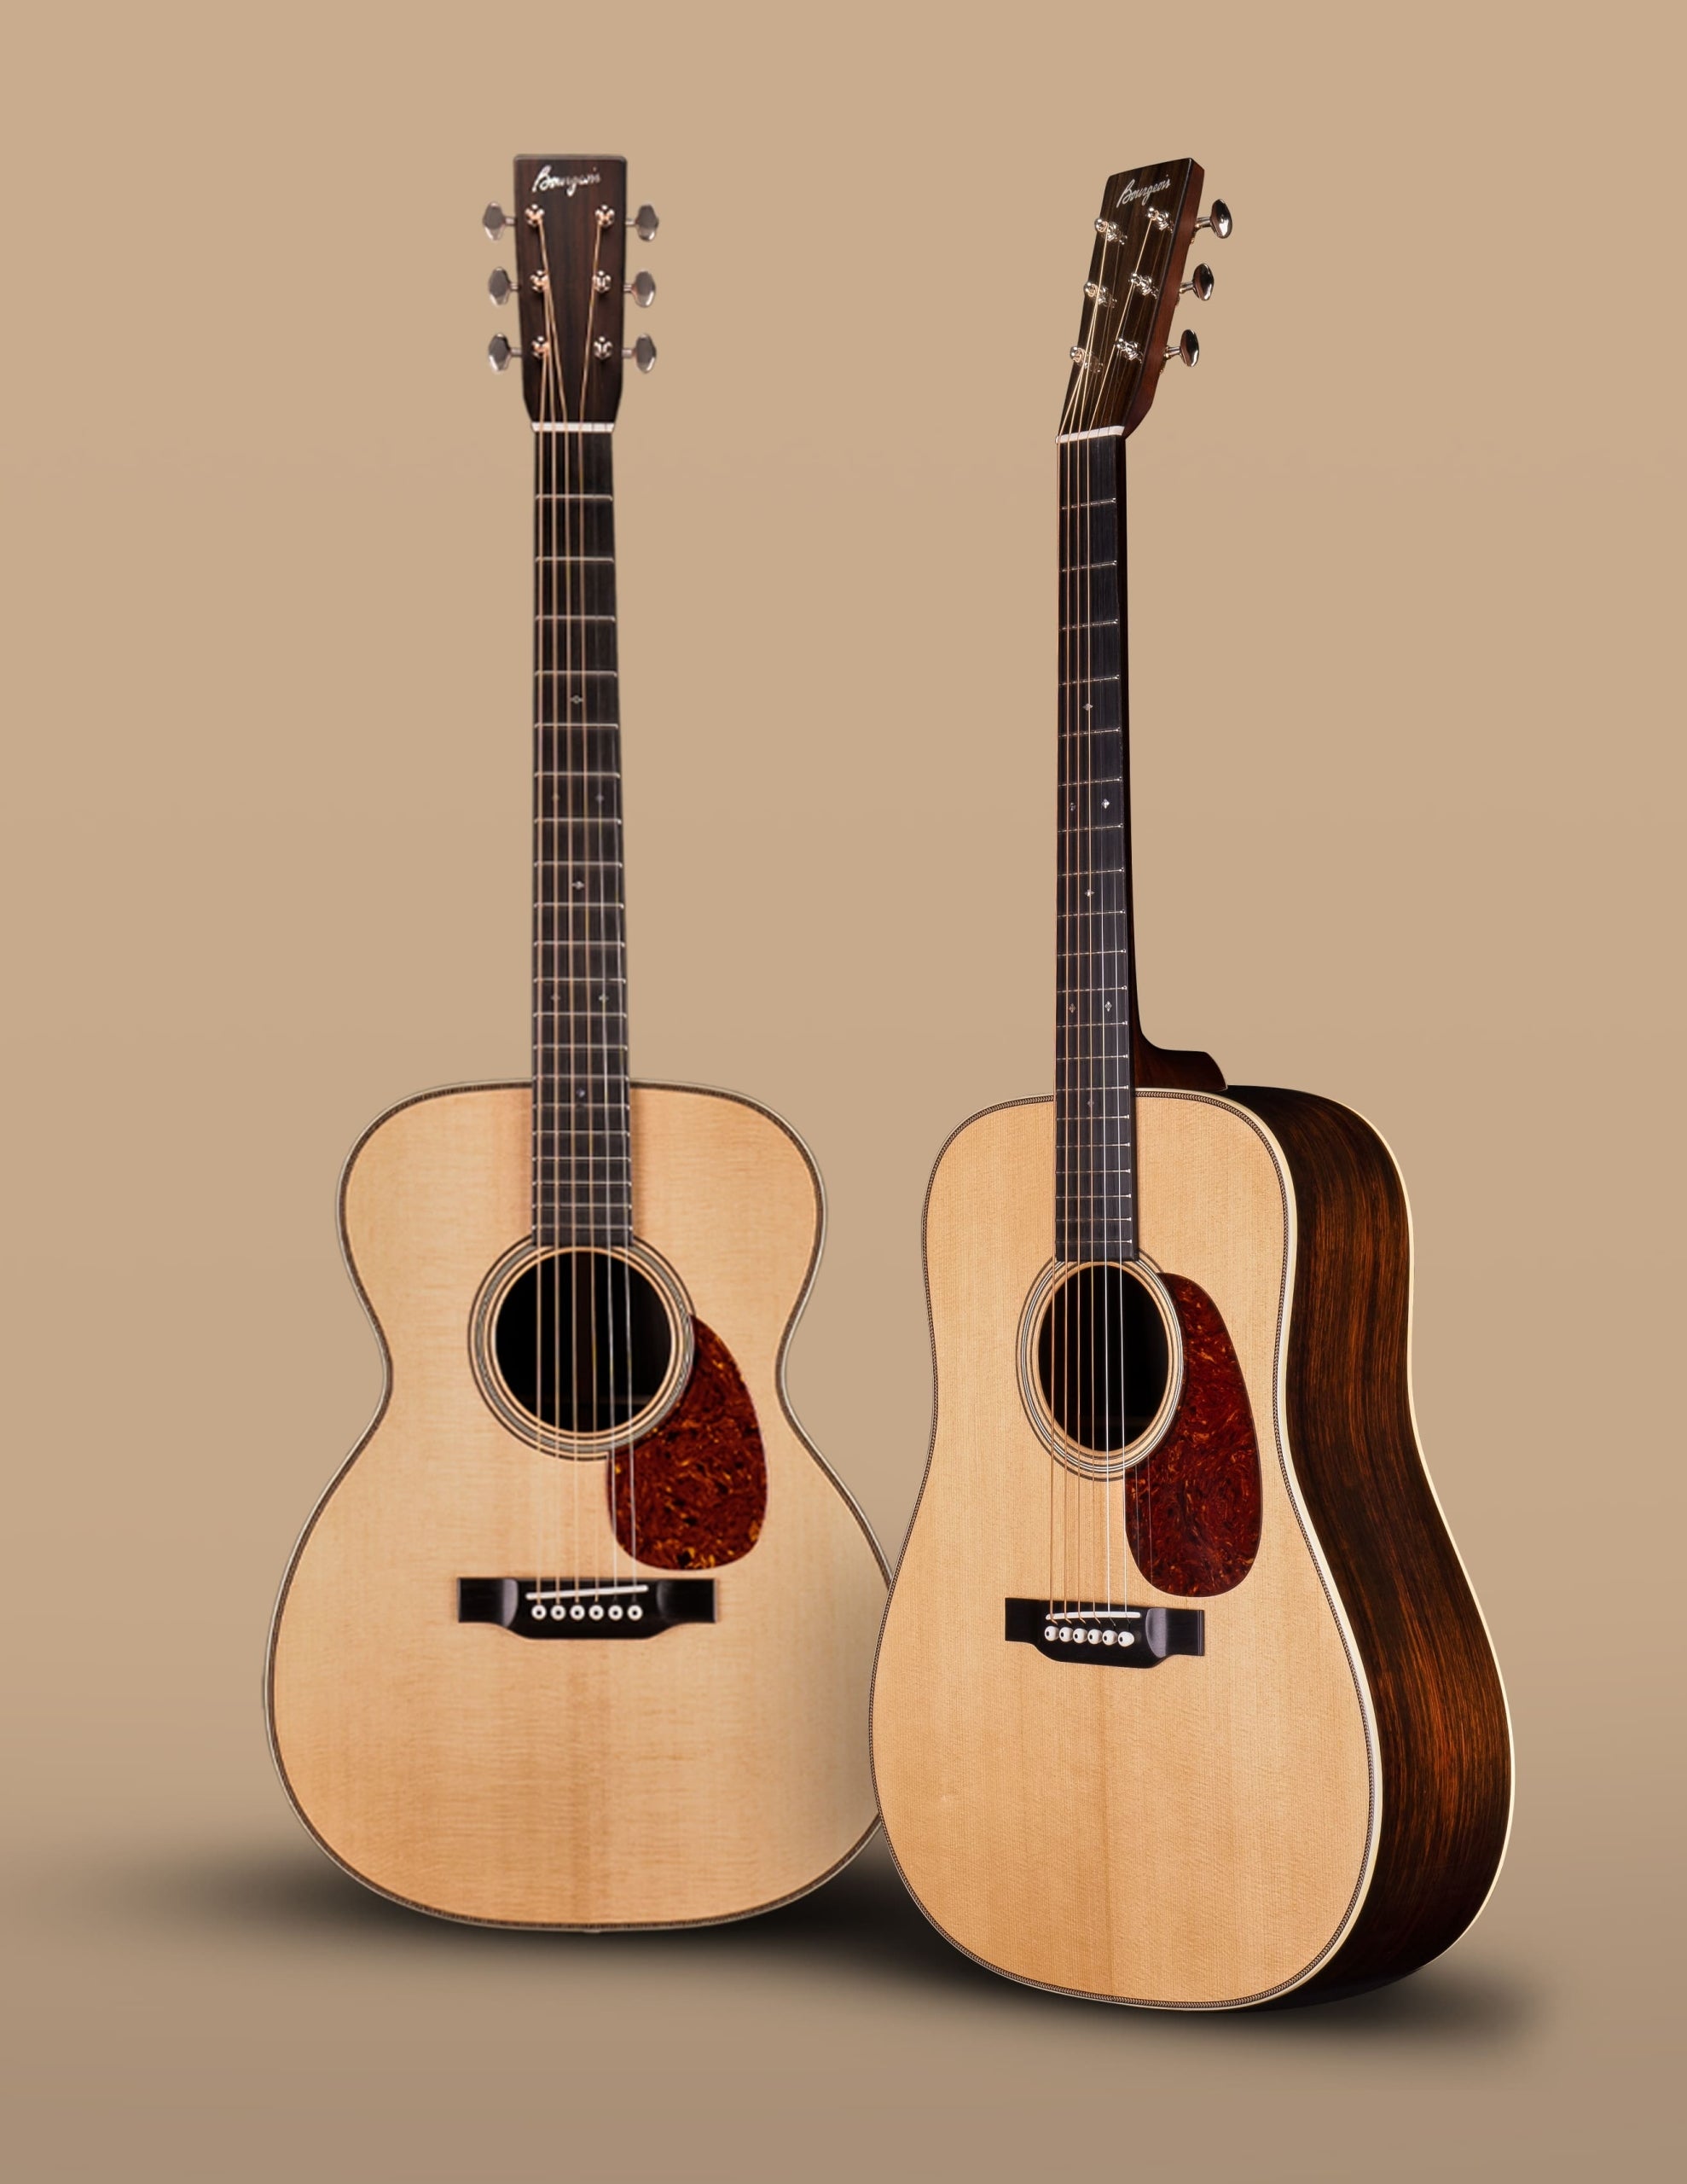 Bourgeois Touchstone Vintage DV/TS Dreadnought Acoustic Guitar, Acoustic Guitar for sale at Richards Guitars.